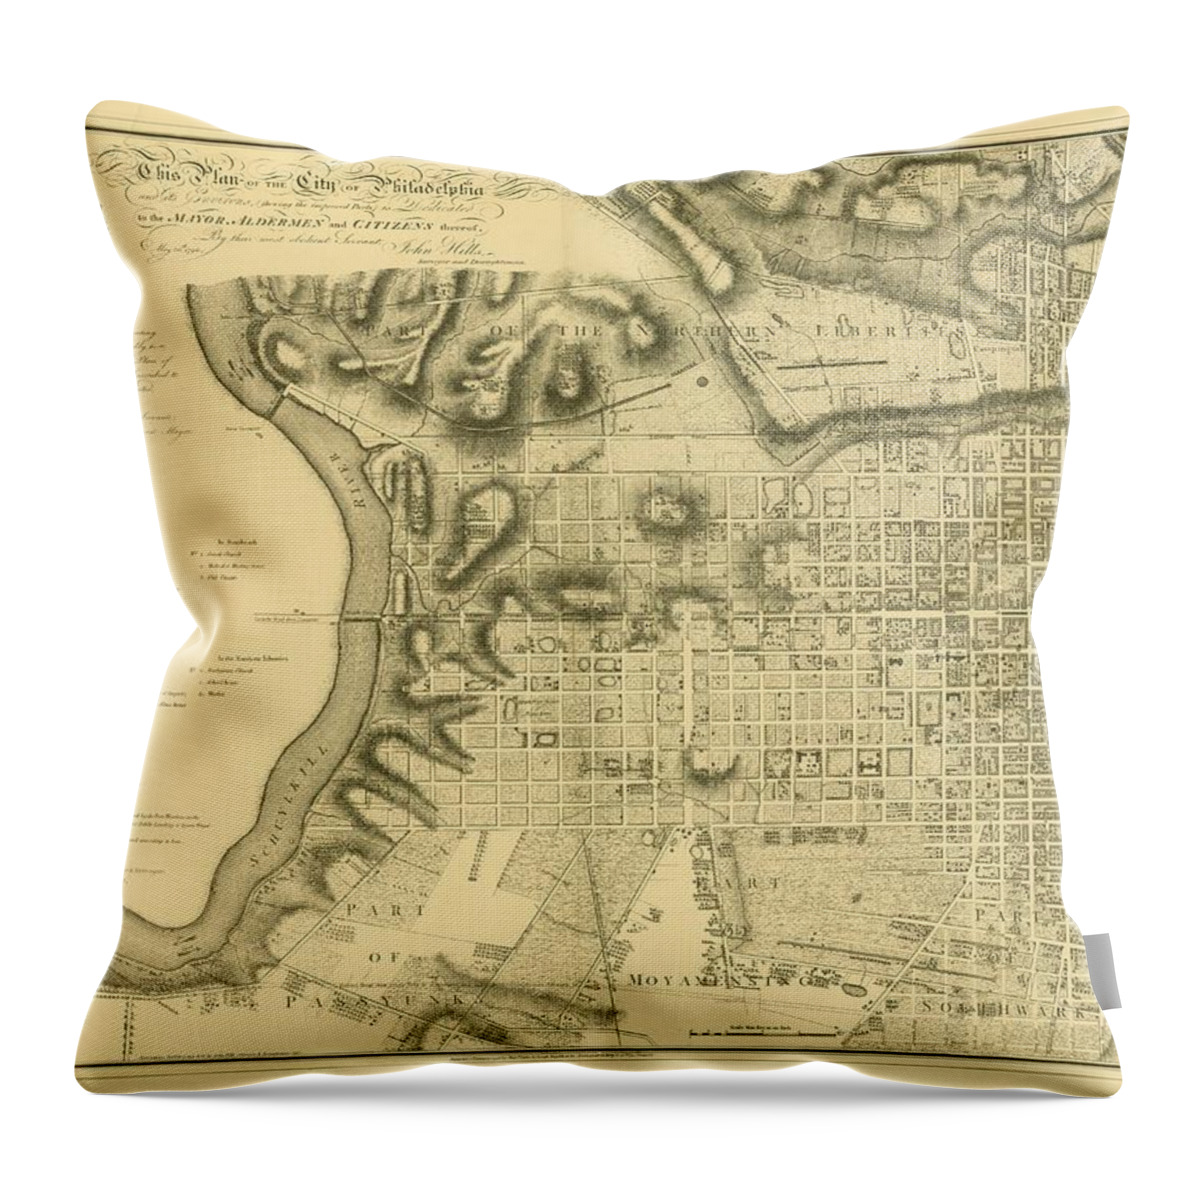 Philadelphia Throw Pillow featuring the mixed media Plan of the City of Philadelphia and Its Environs shewing the improved parts, 1796 by John Hills